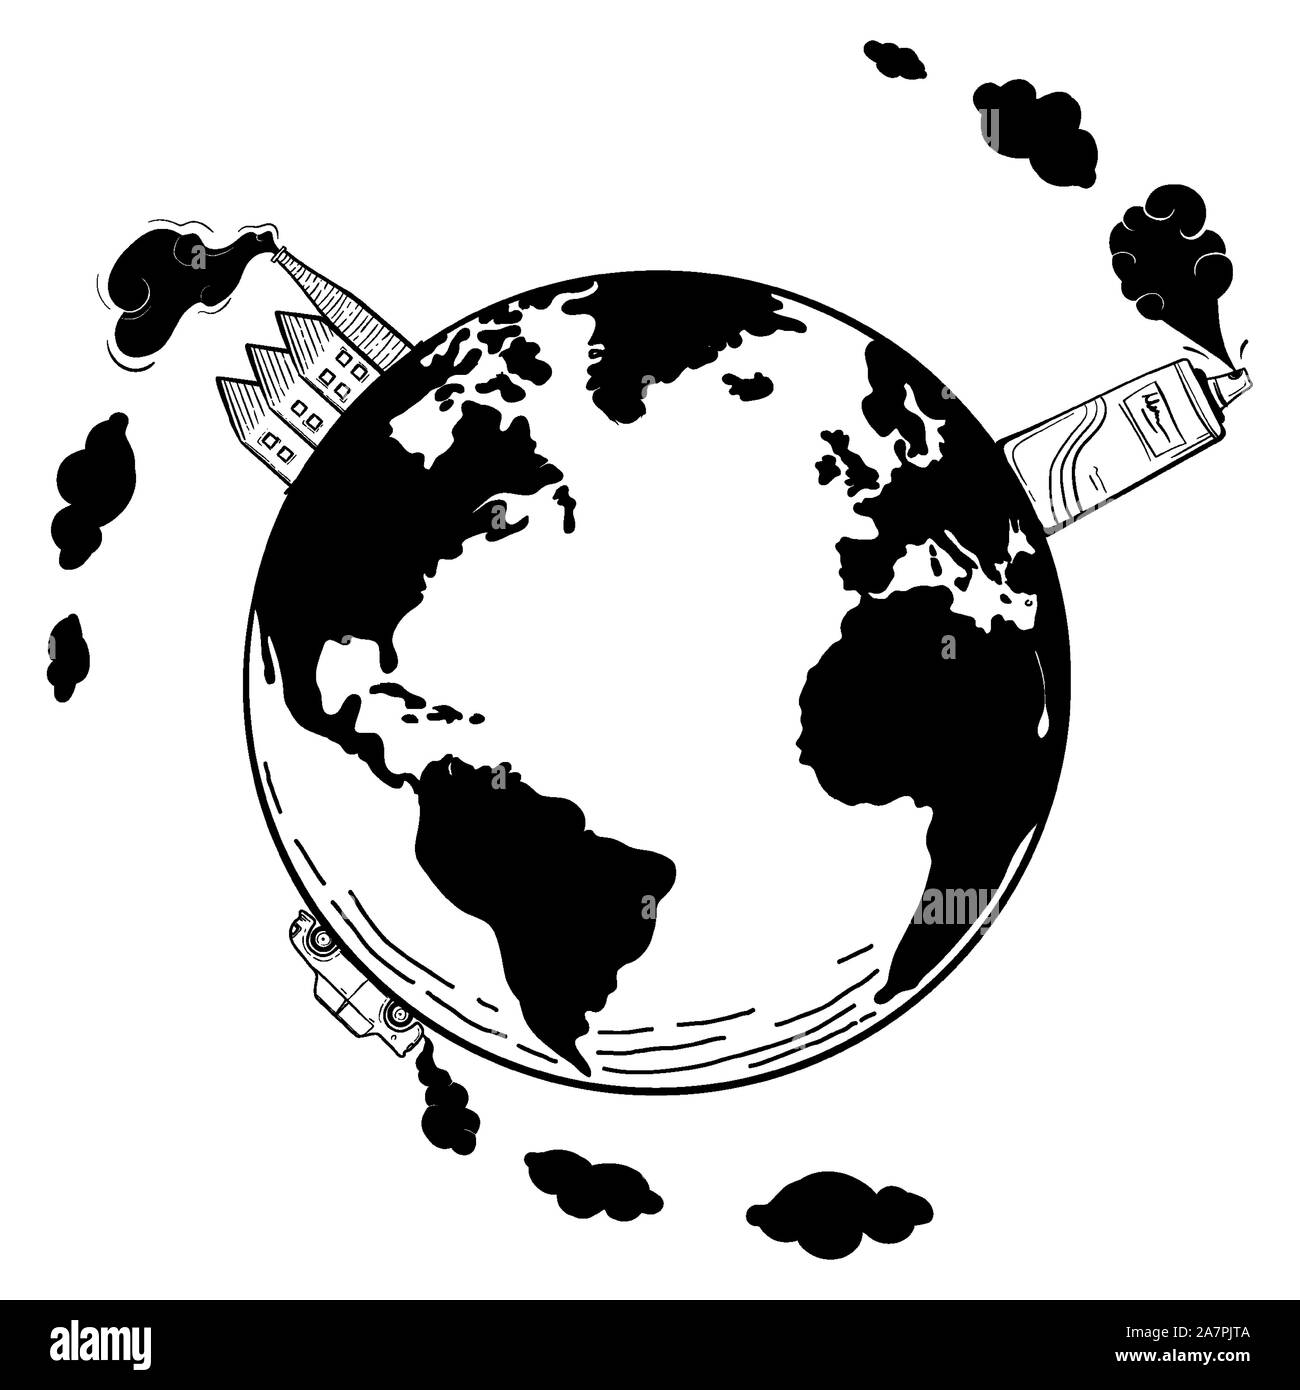 Suffocate” | Air pollution poster, Poster on pollution, Earth drawings